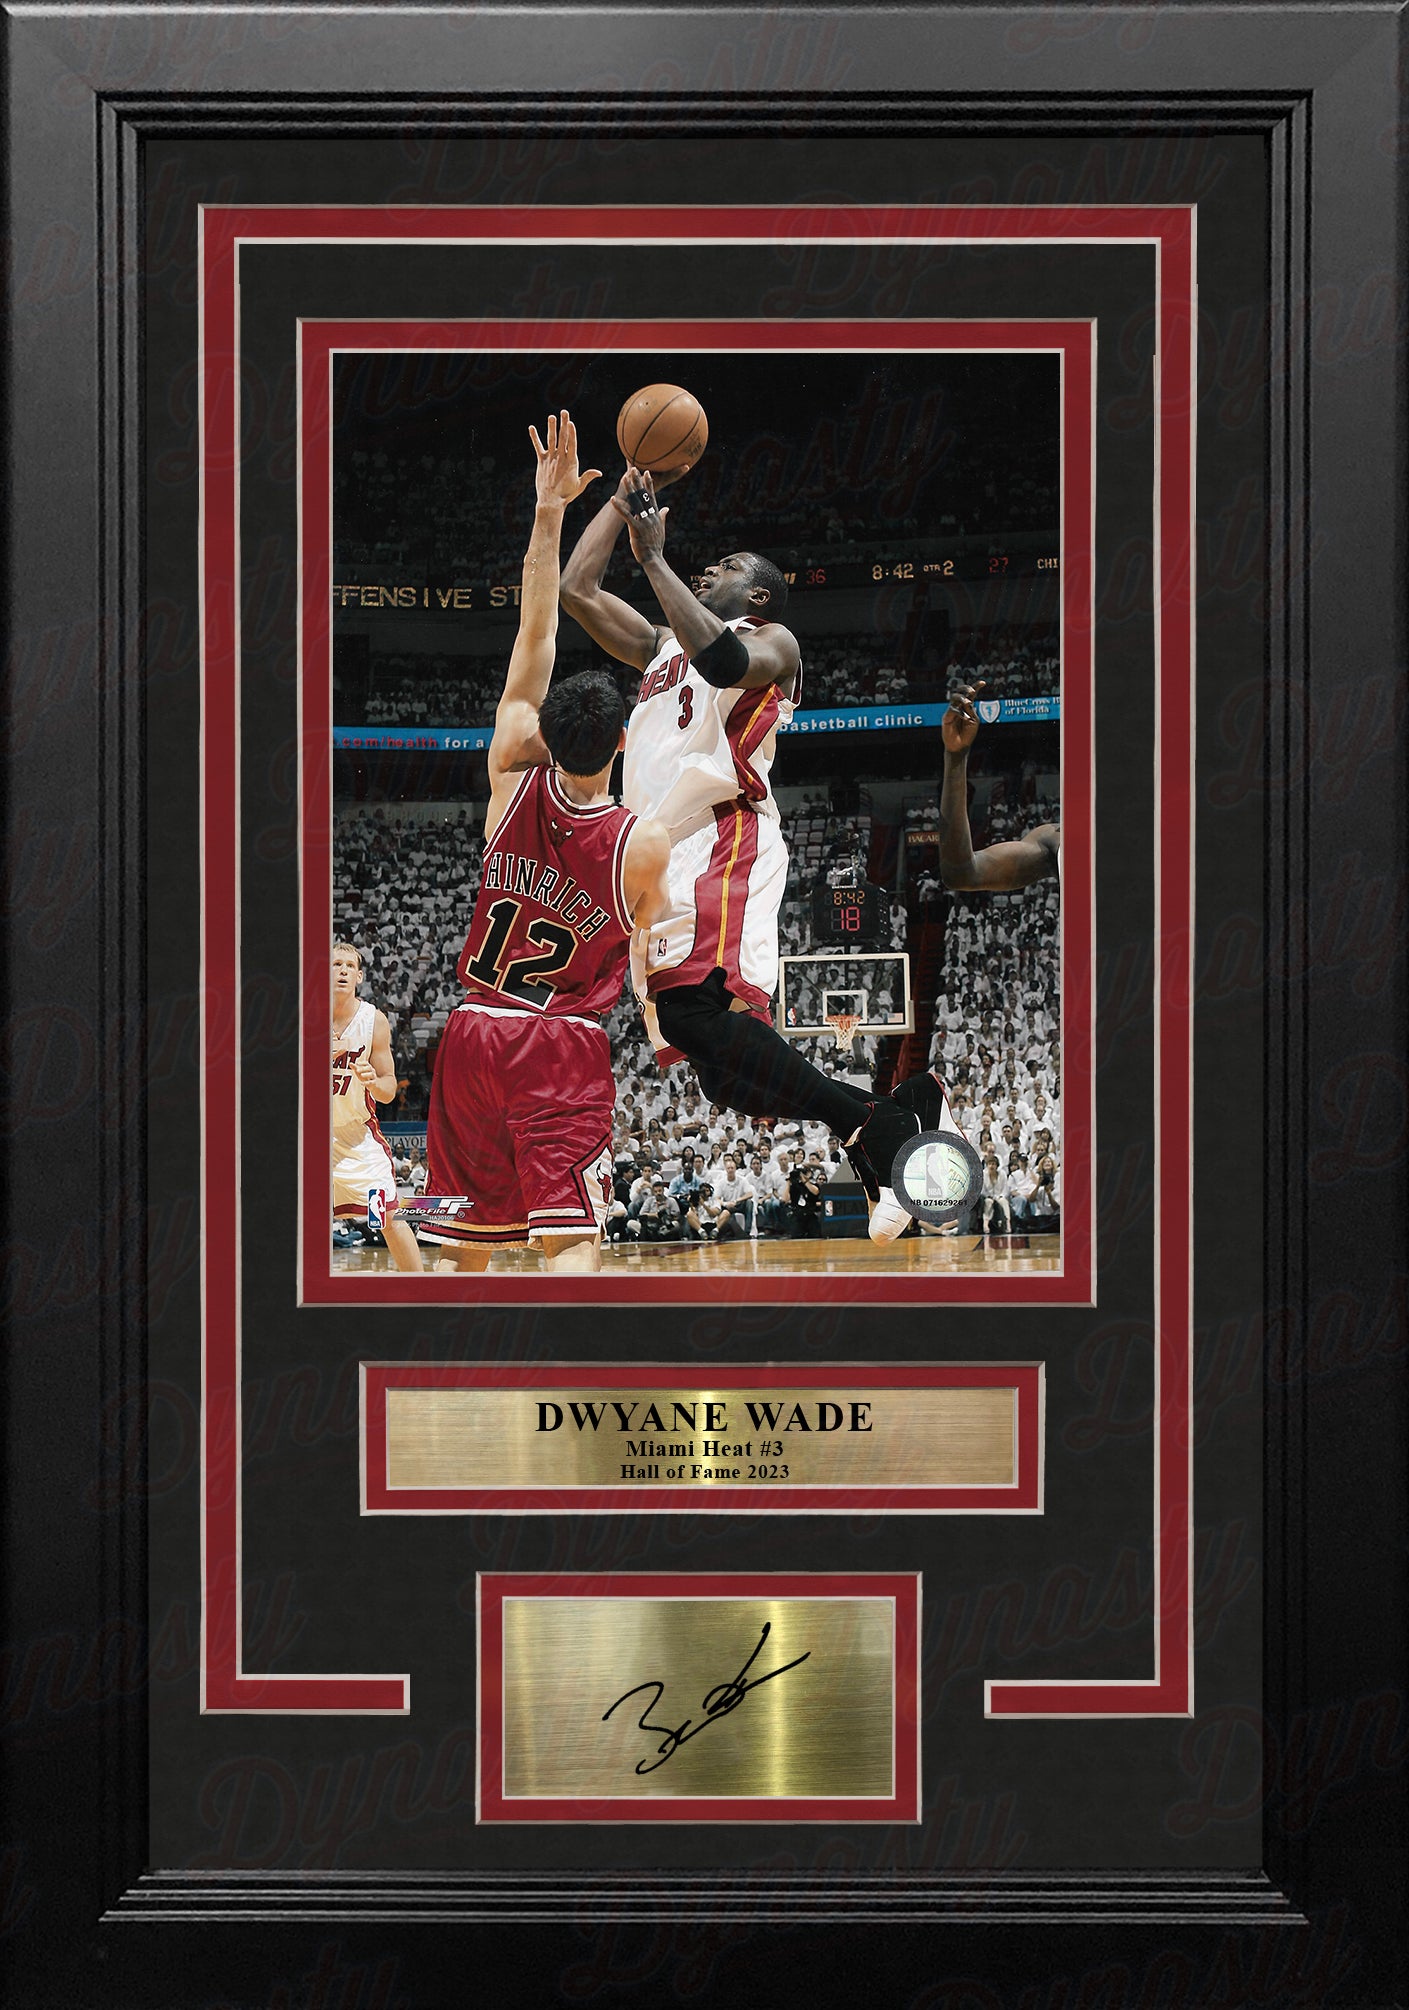 Dwyane Wade in Action Miami Heat 8 x 10 Framed Basketball Photo with  Engraved Autograph